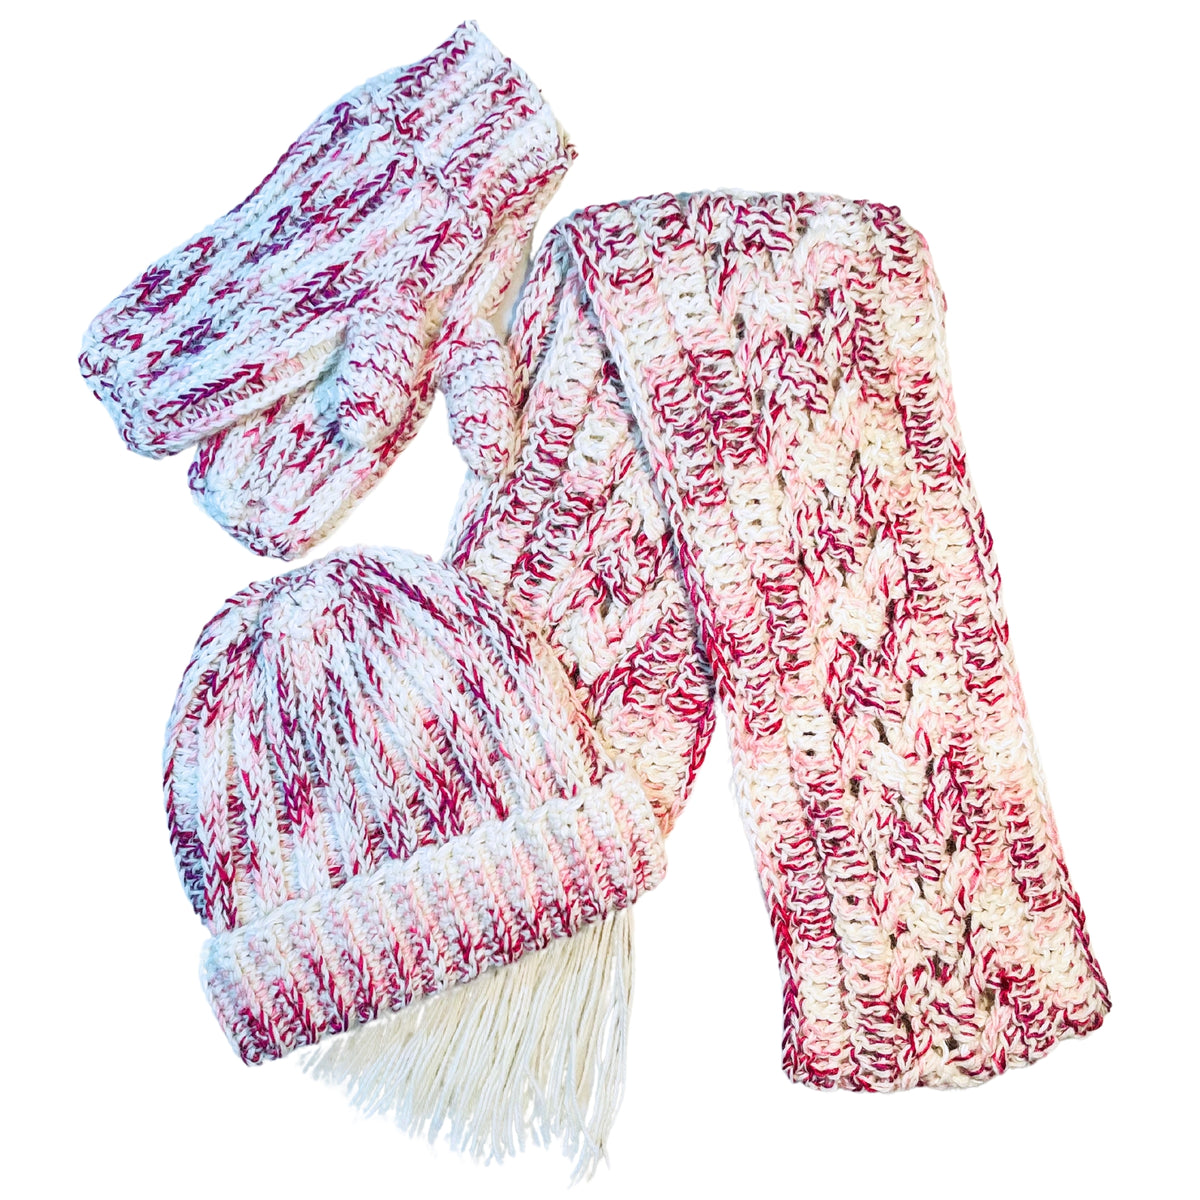 Cozy soft warm alpaca and bamboo matching set of ridge ribbed hat, scarf with long tassels, and ridge ribbed mittens for winter fashion. Handmade knitted crochet items made from yarn in the colors fuchsia, dark pink, light pink, carnation, and white.